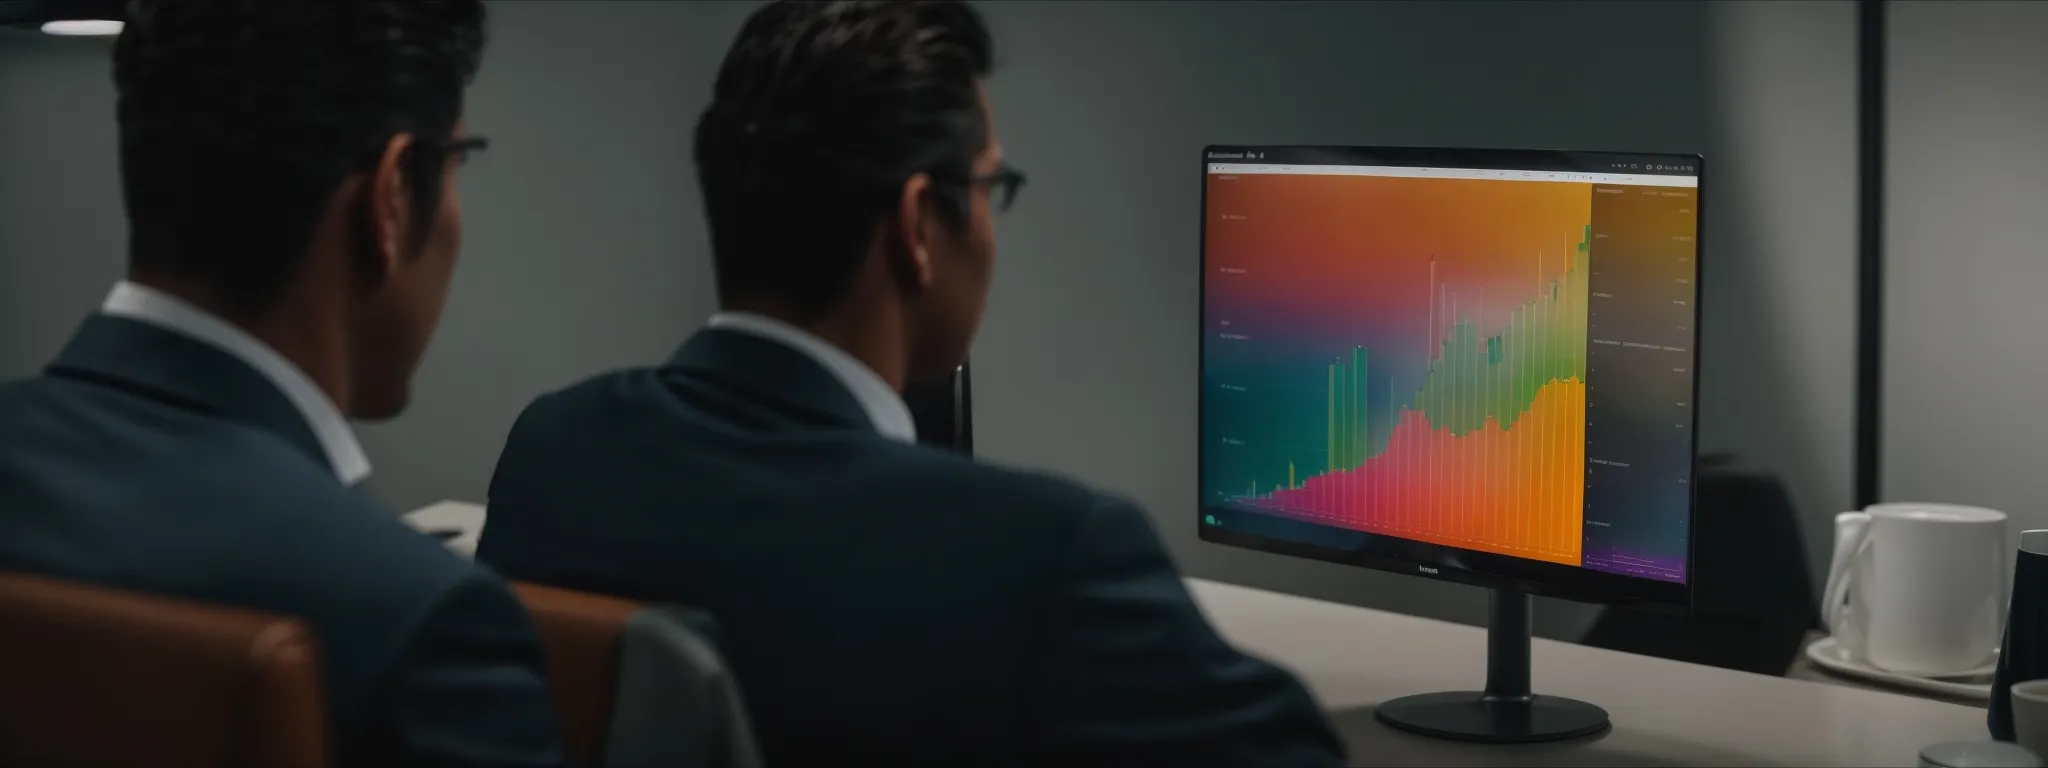 a person is presenting a colorful seo performance graph on a monitor during a meeting.